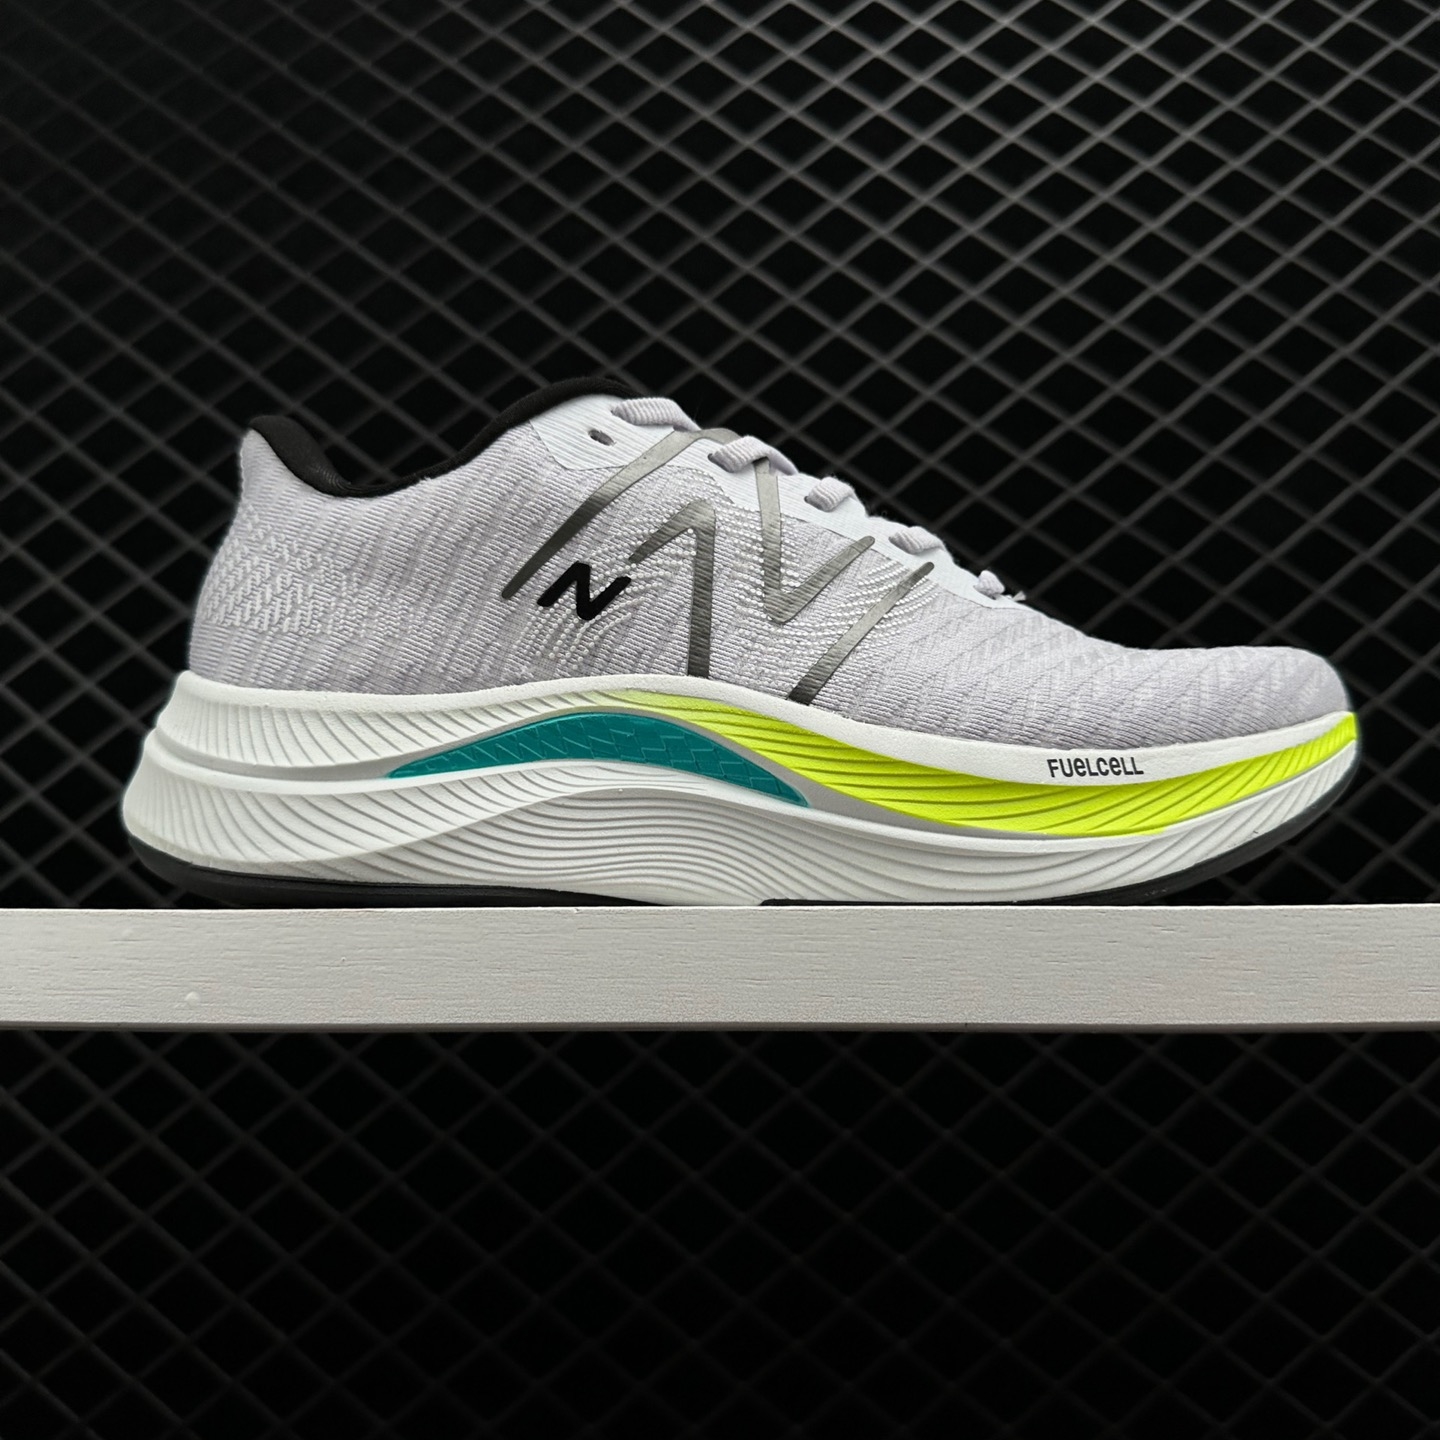 New Balance FuelCell Propel v4 White Teal - Lightweight and Responsive Running Shoes